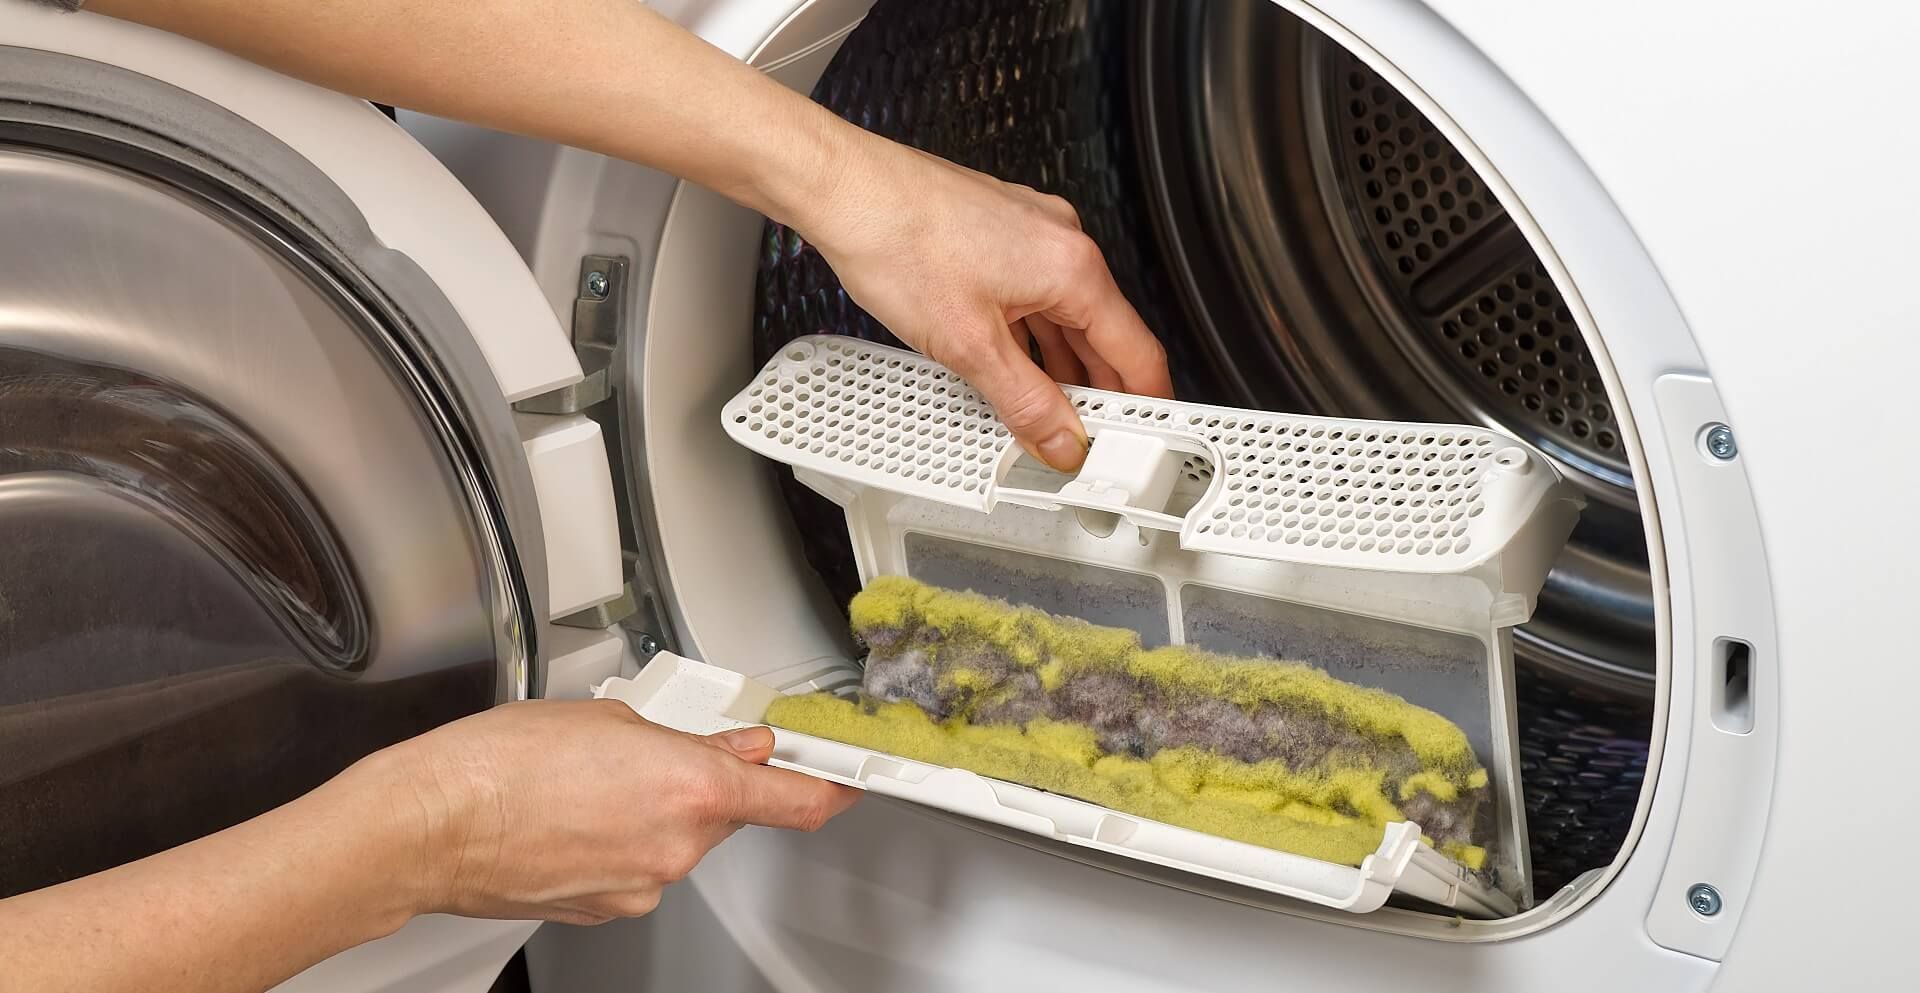 Keeping your dryer vents clean and well-maintained can keep your dryer functional and home safe